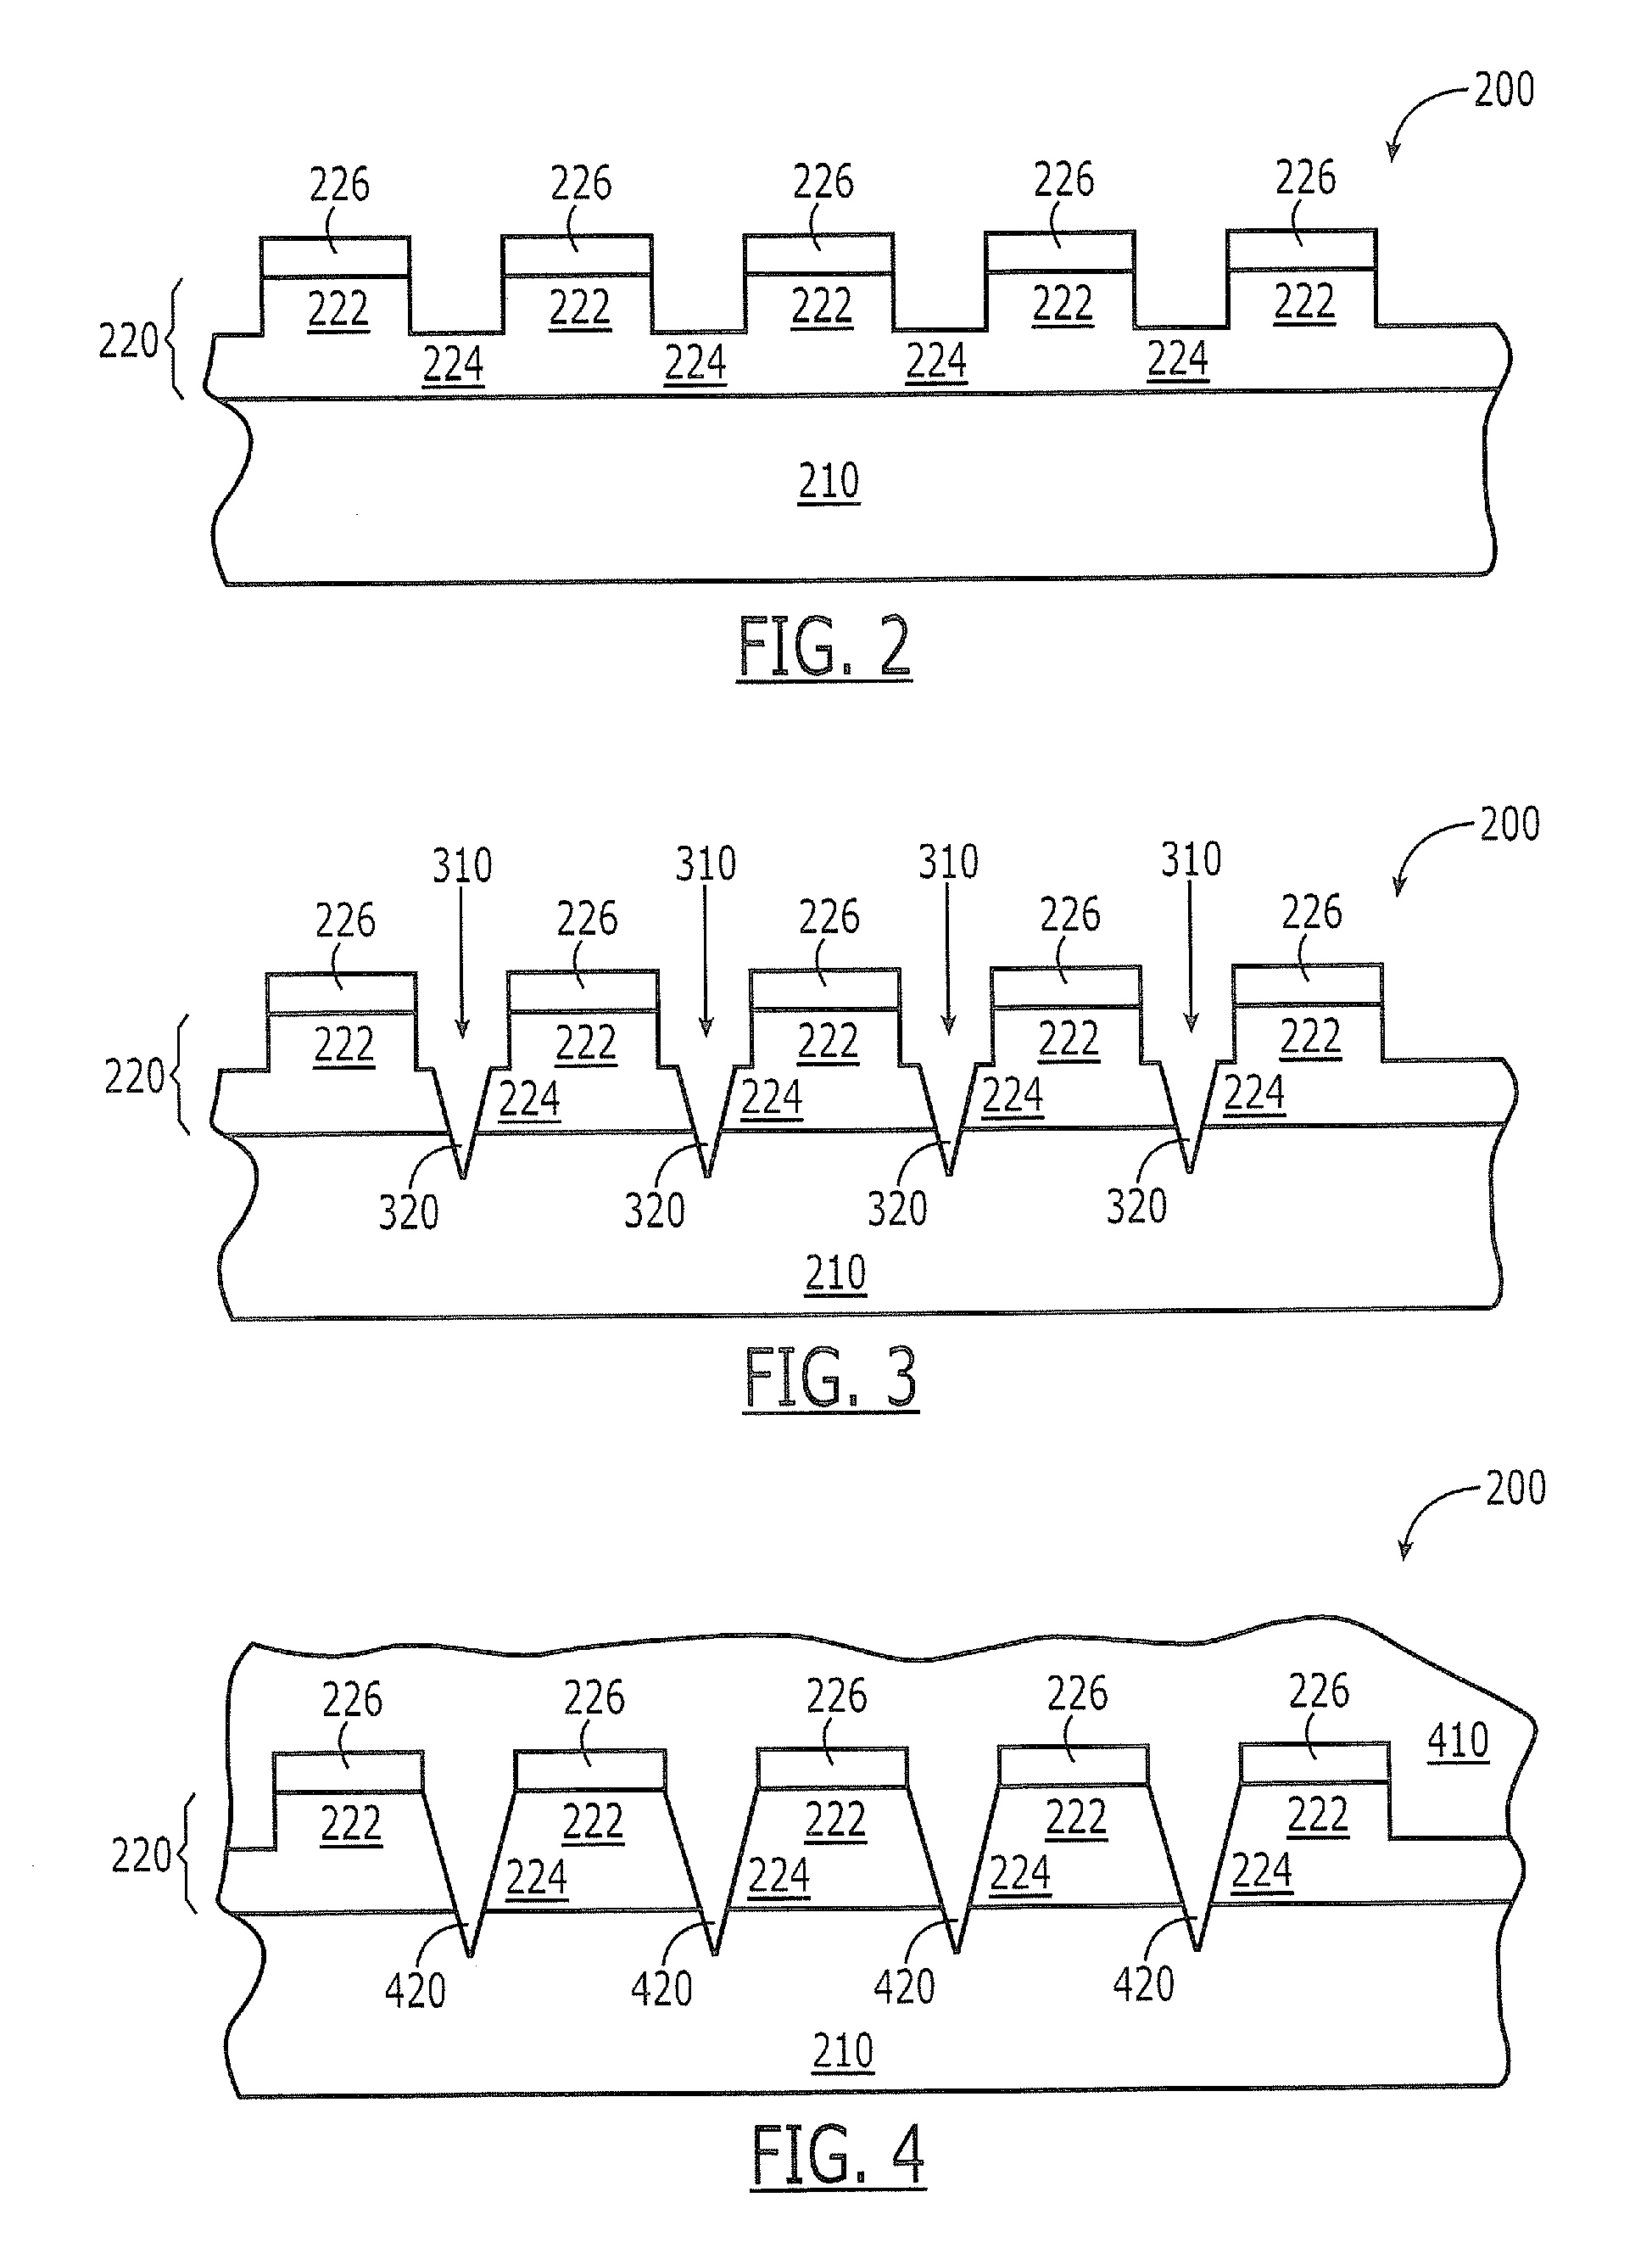 Front end scribing of light emitting diode (LED) wafers and resulting devices